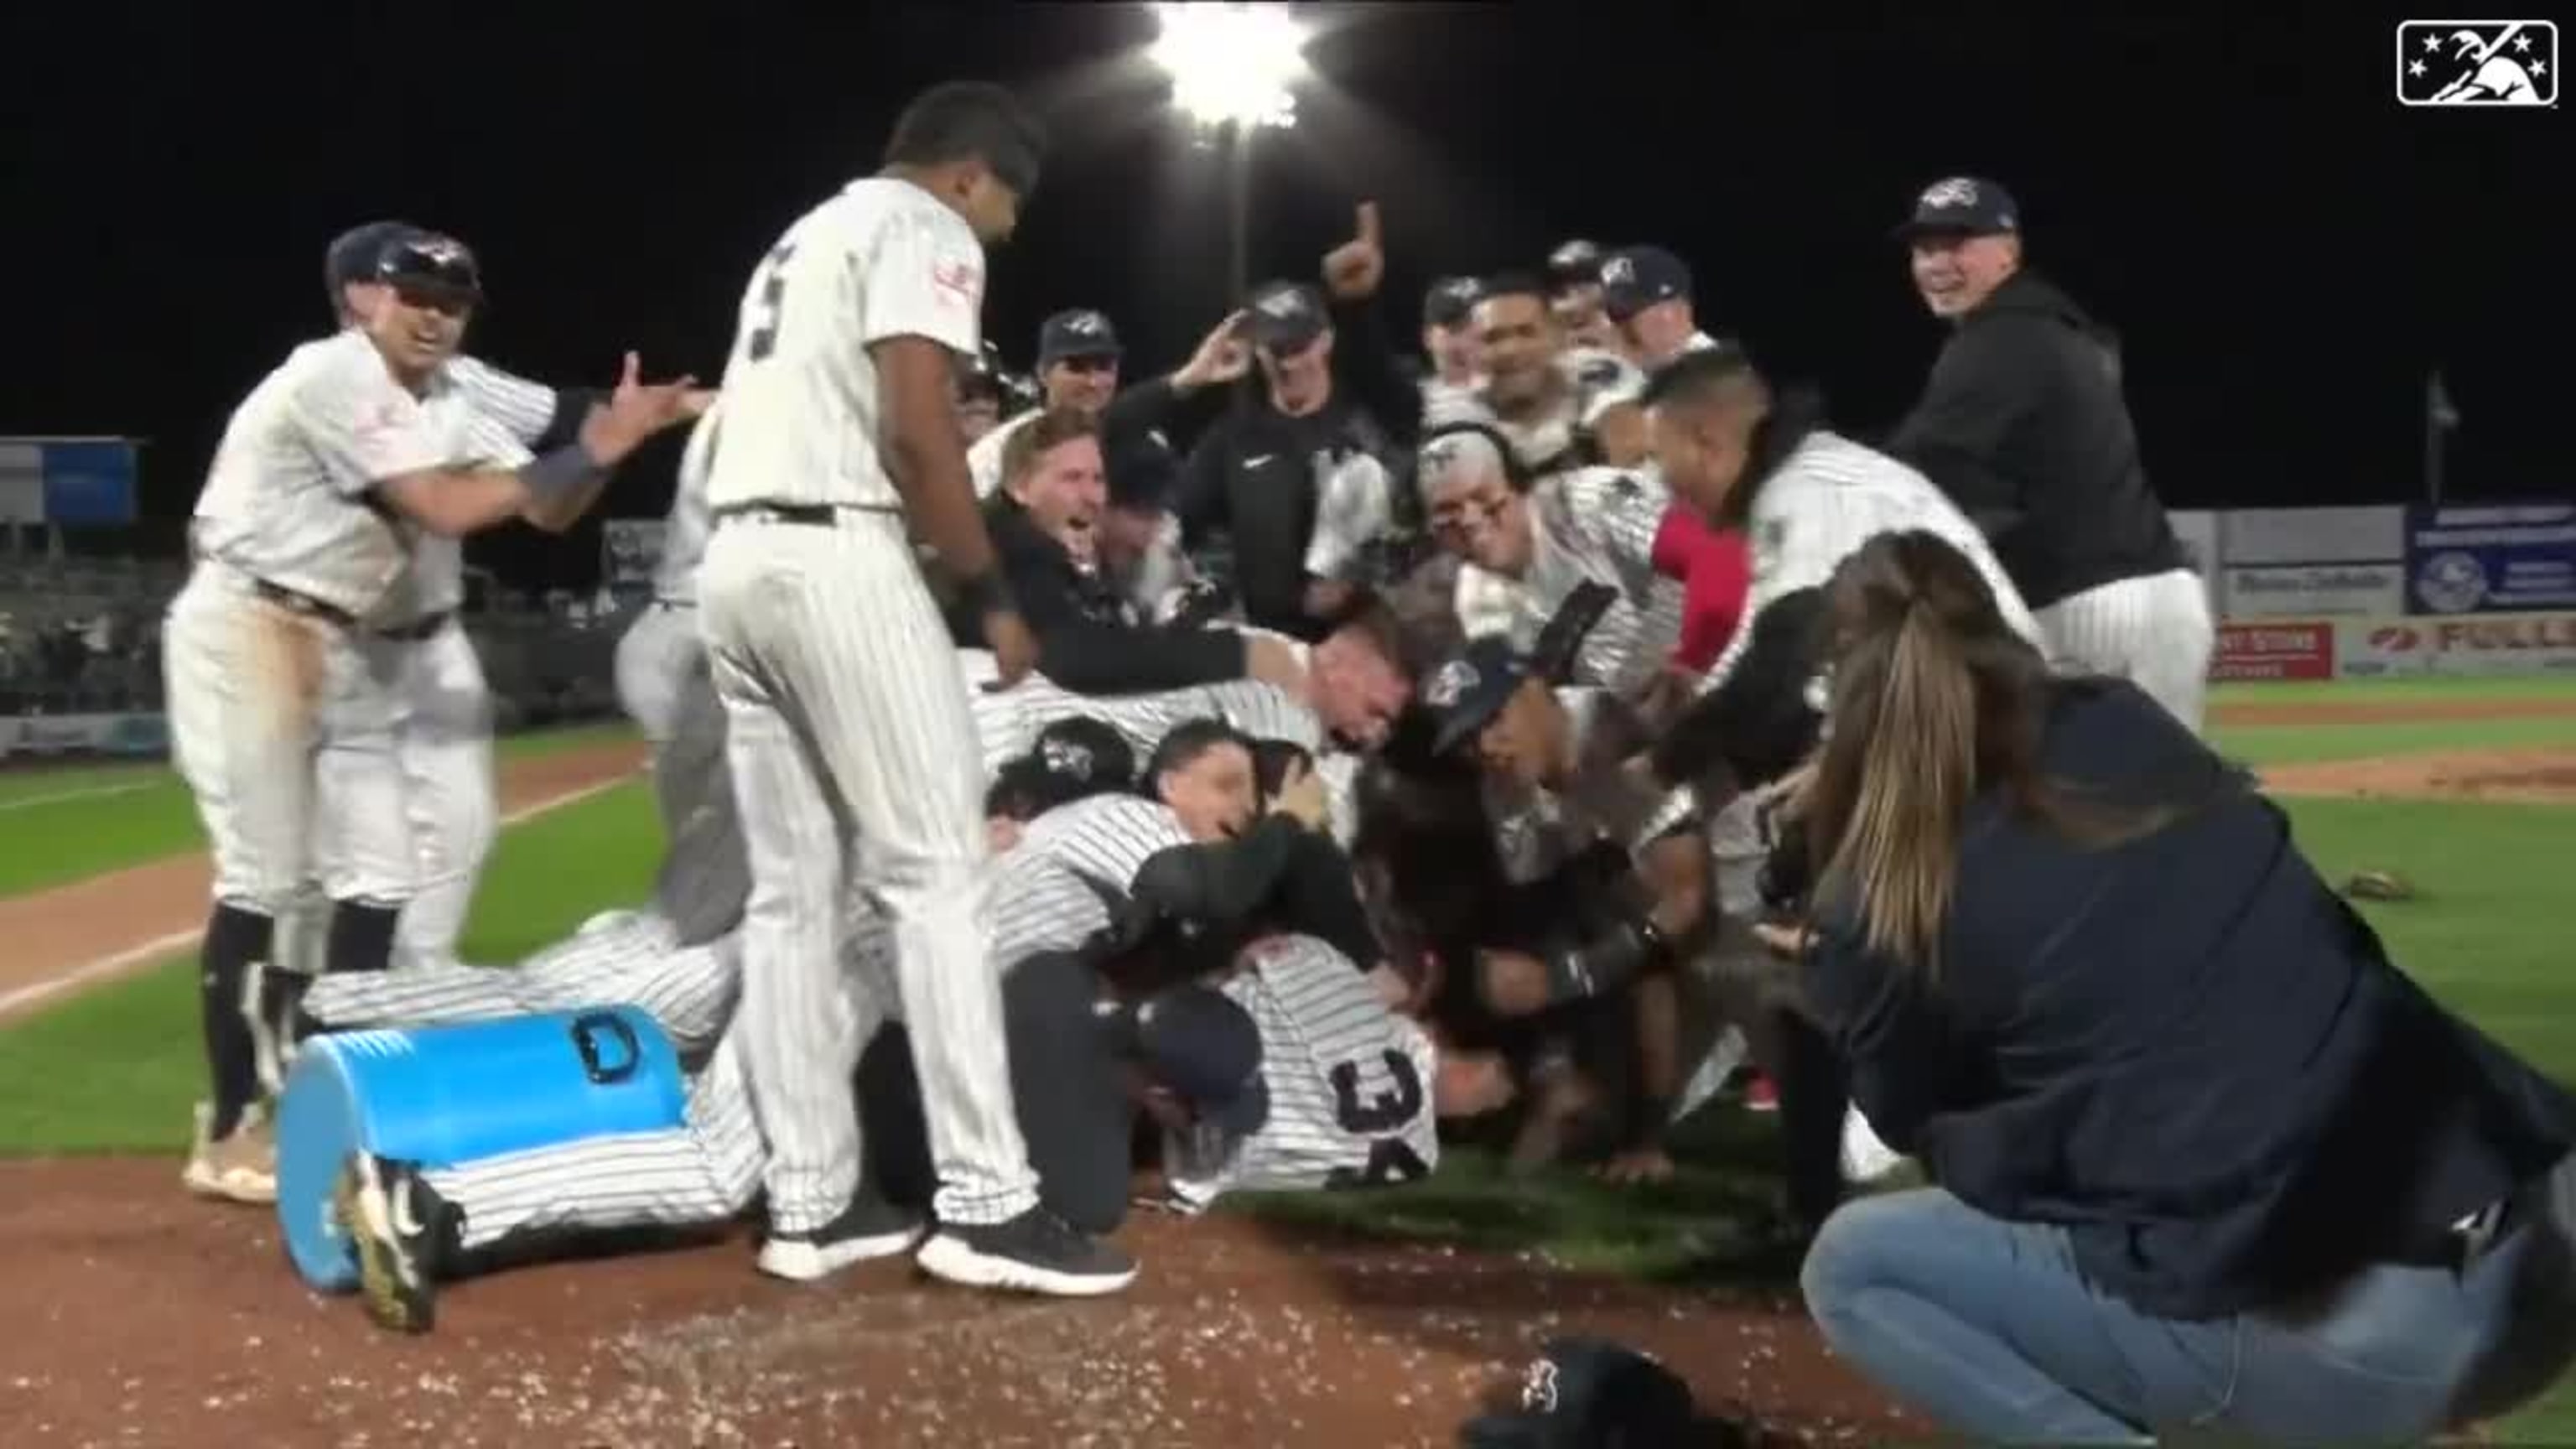 2022 Midwest League playoffs coverage